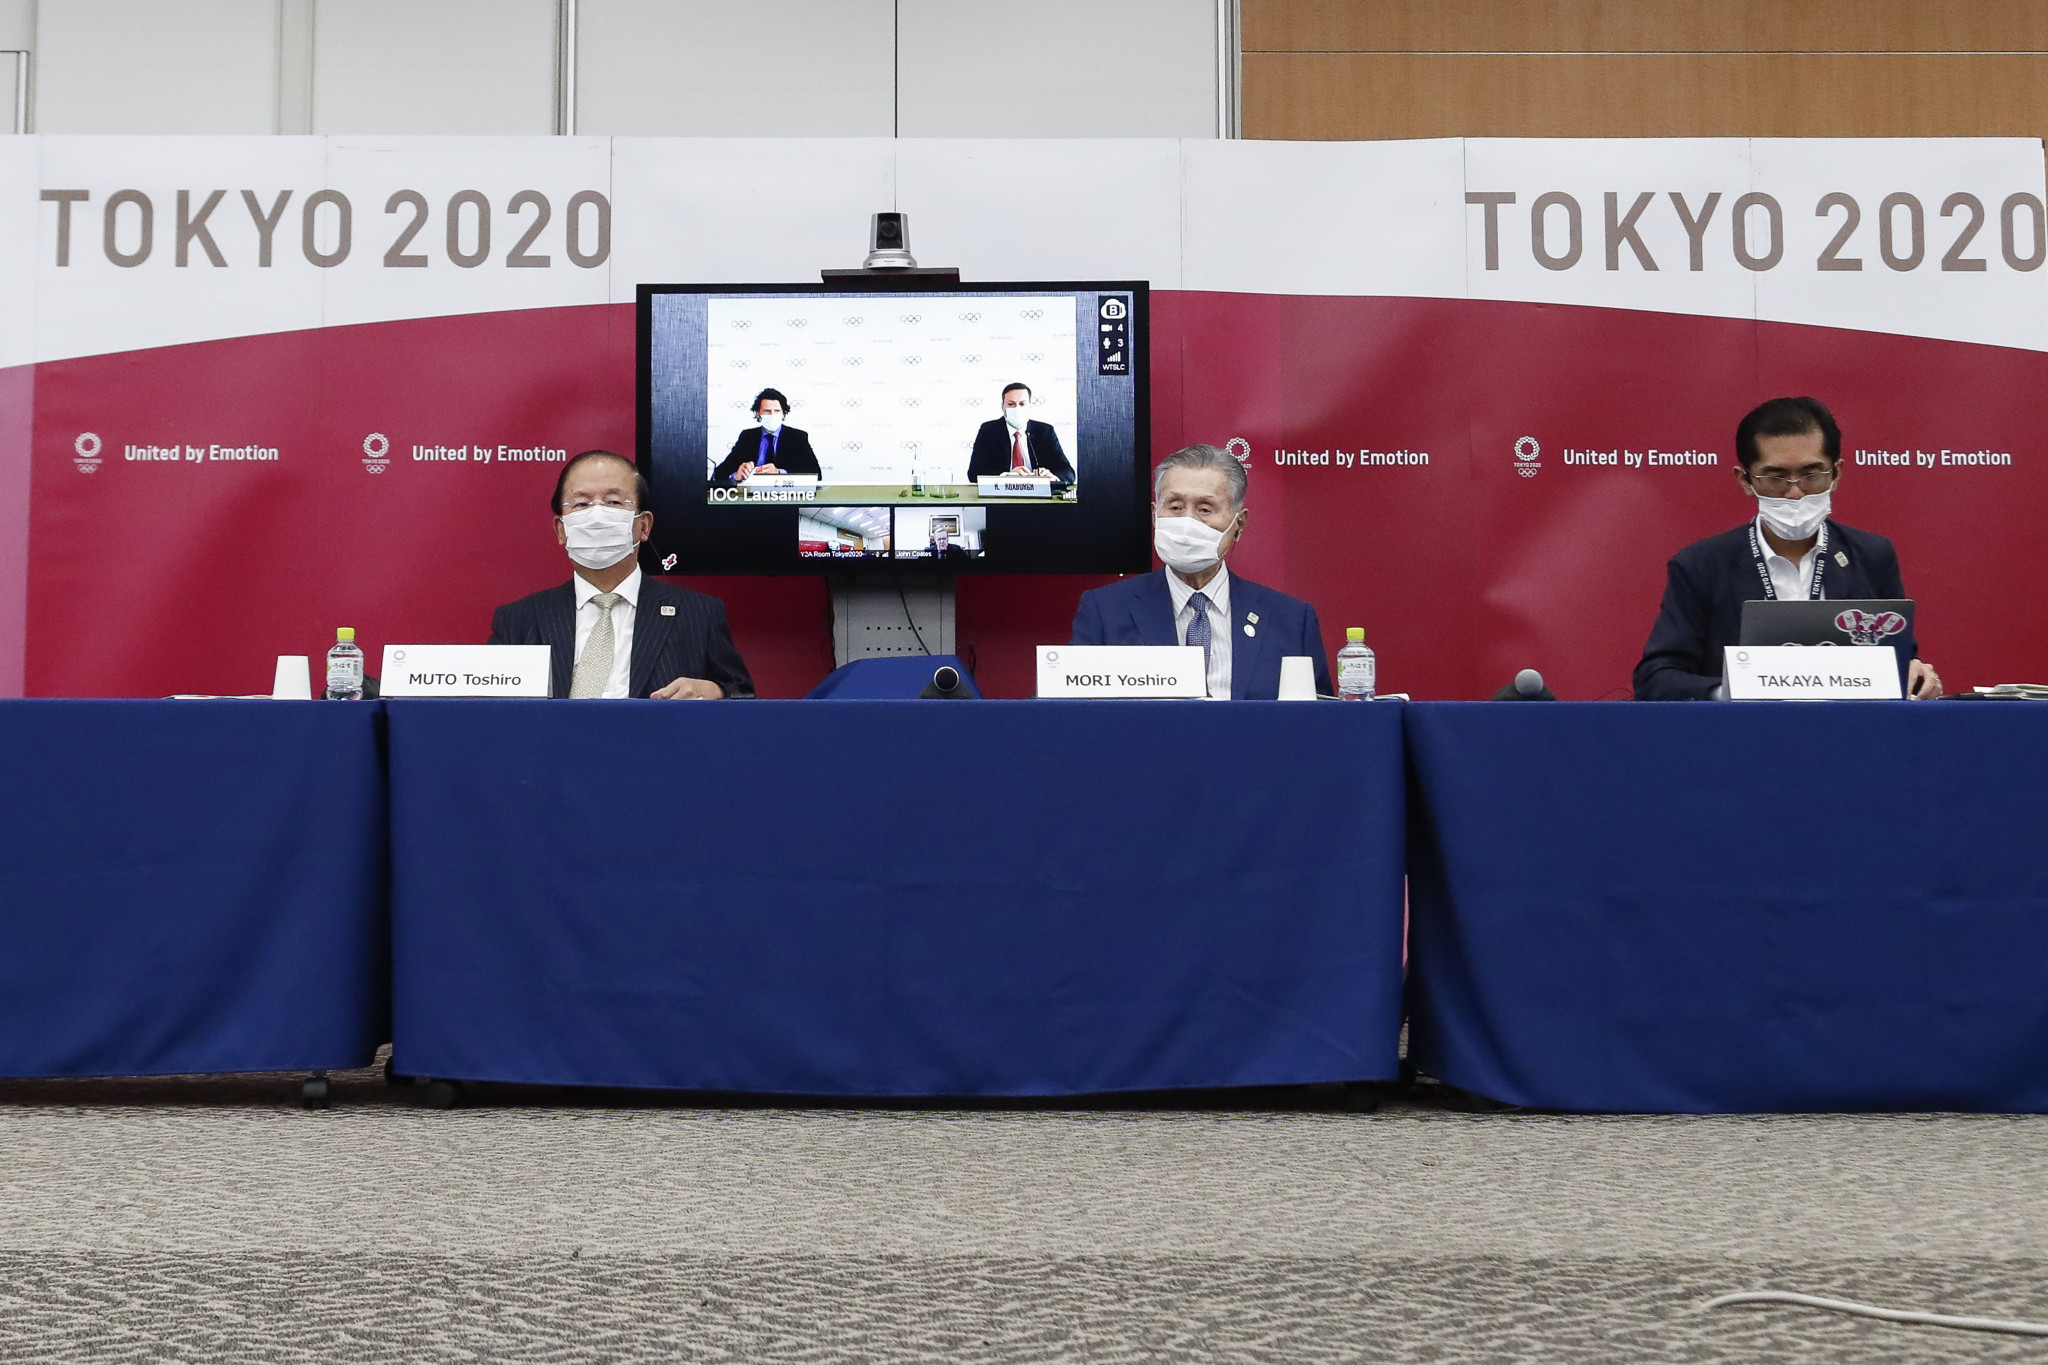 Tokyo 2020 are currently trying to organise the Olympic and Paralympic Games against the backdrop of the pandemic ©Getty Images